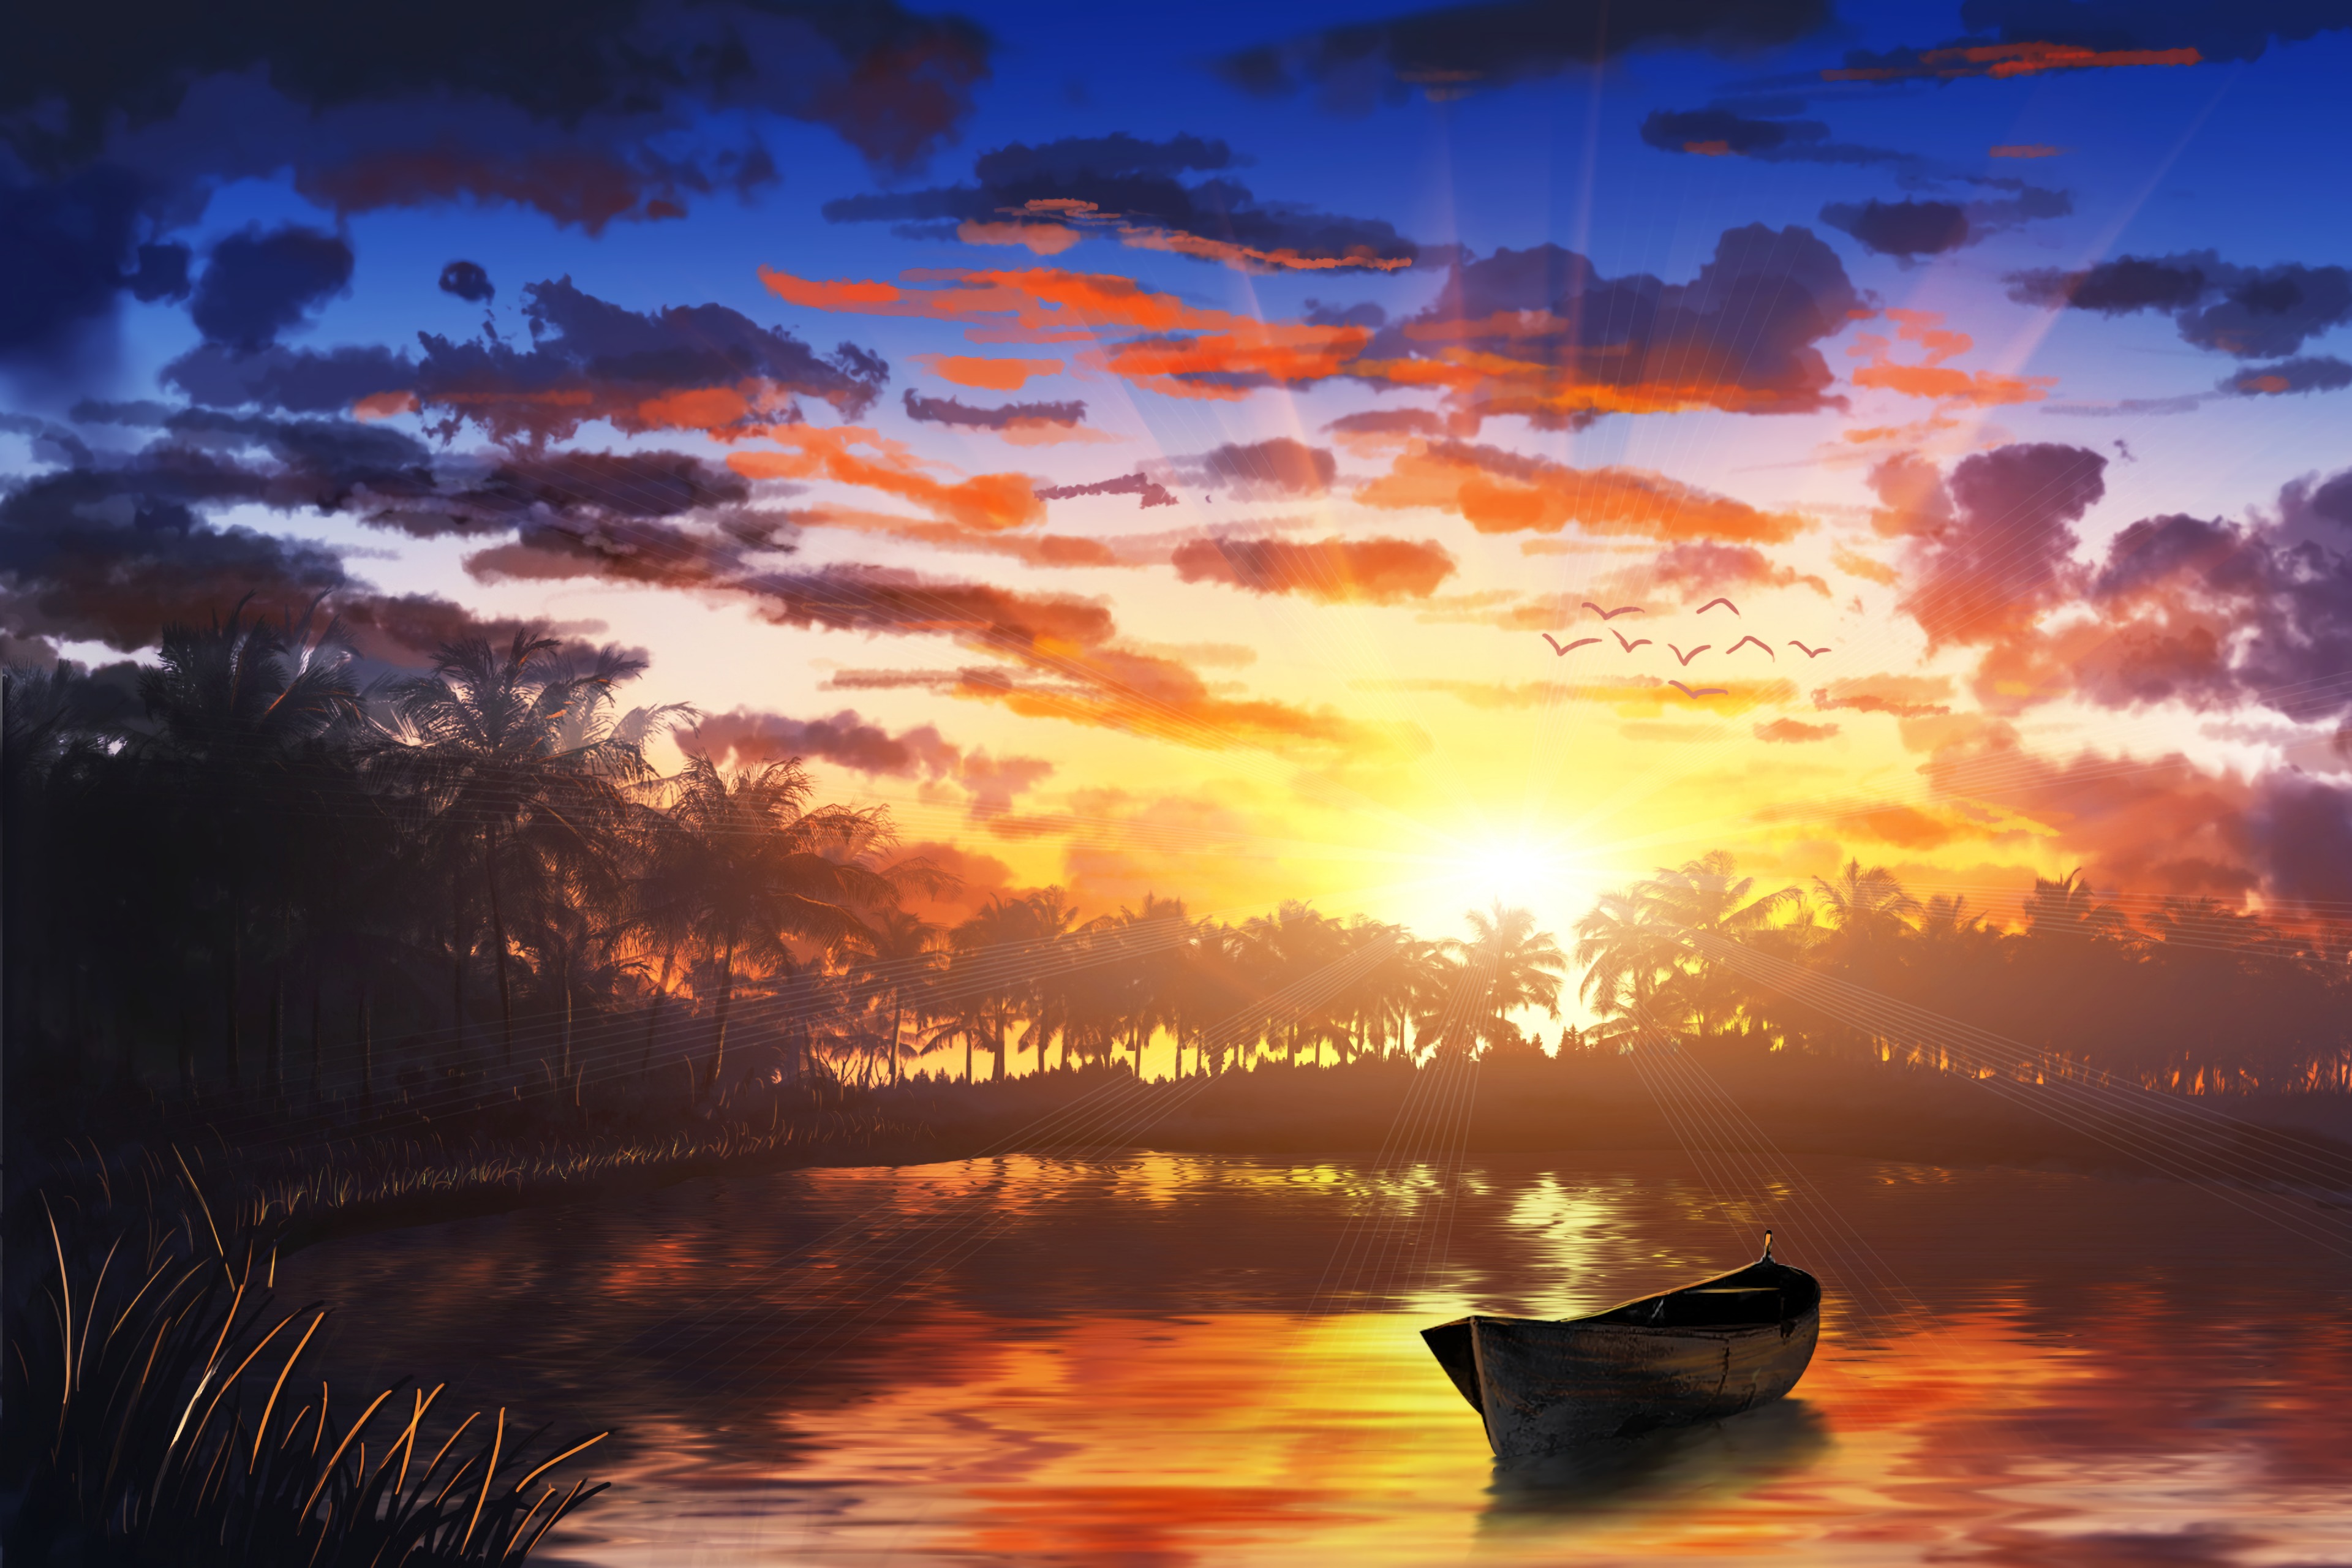 86155 download wallpaper water, sunset, art, palms, boat screensavers and pictures for free